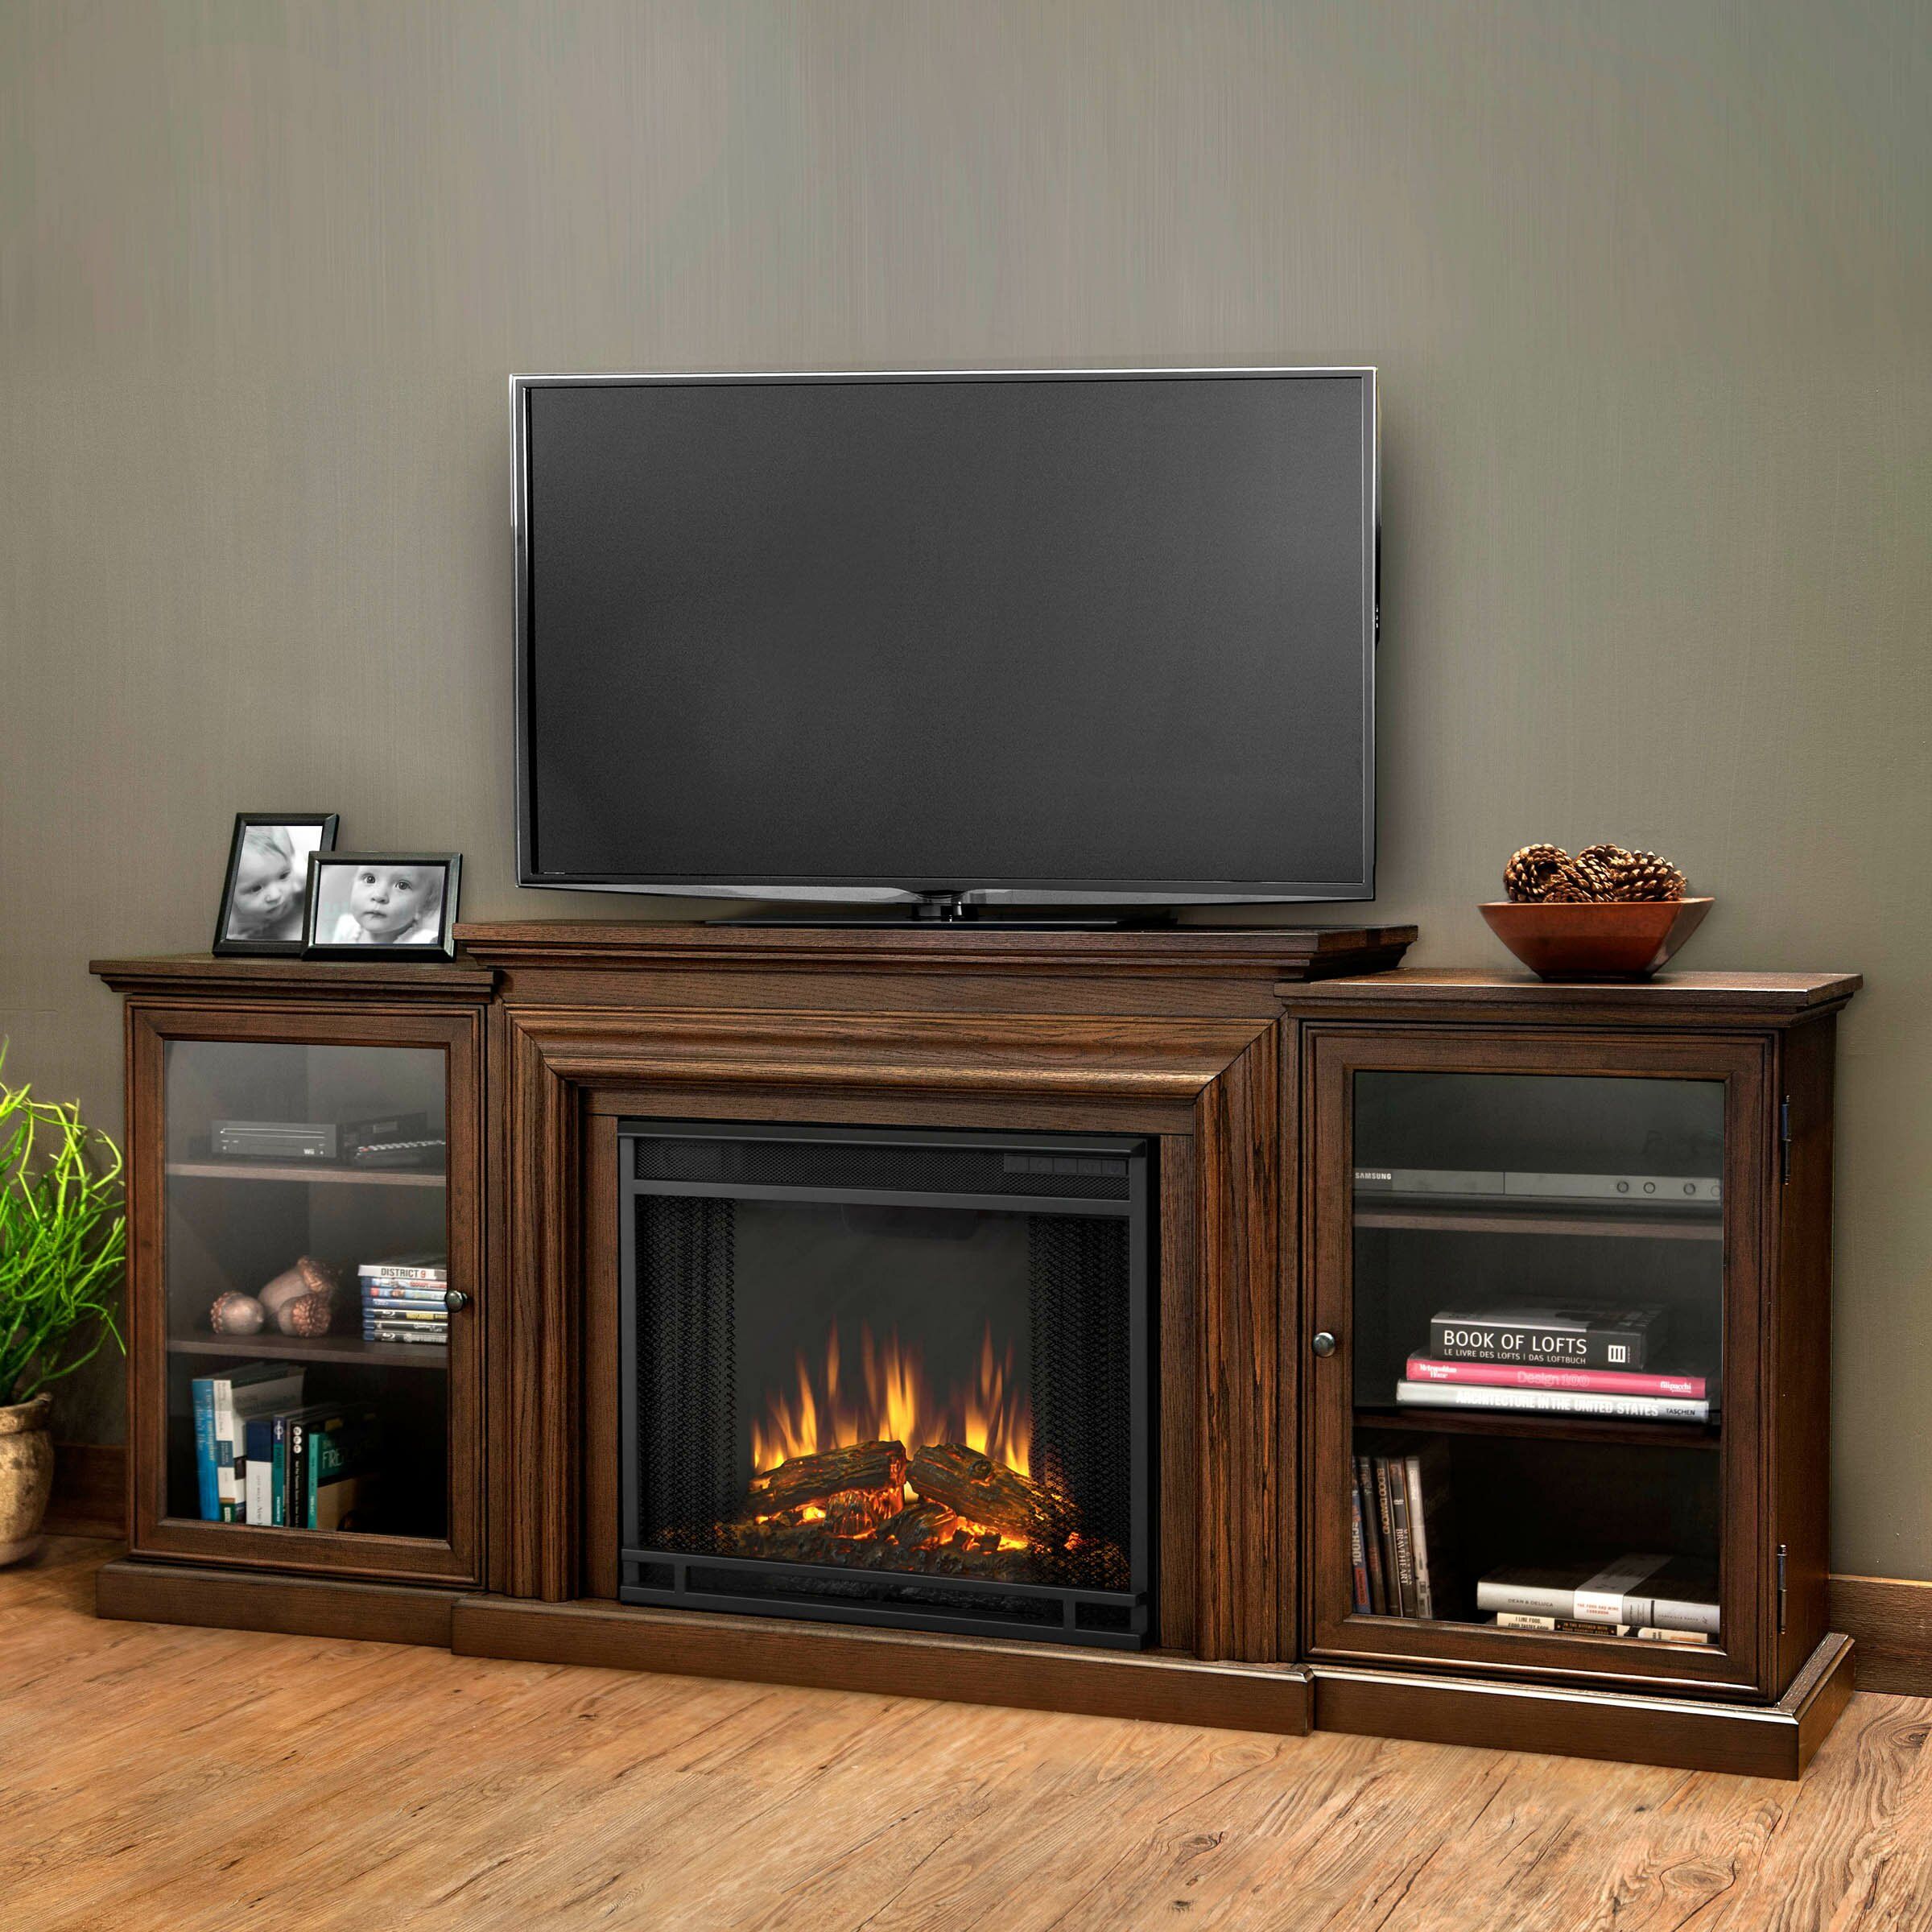 Real Flame Frederick Tv Stand With Electric Fireplace & Reviews | Wayfair Inside Electric Fireplace Tv Stands (View 6 of 20)